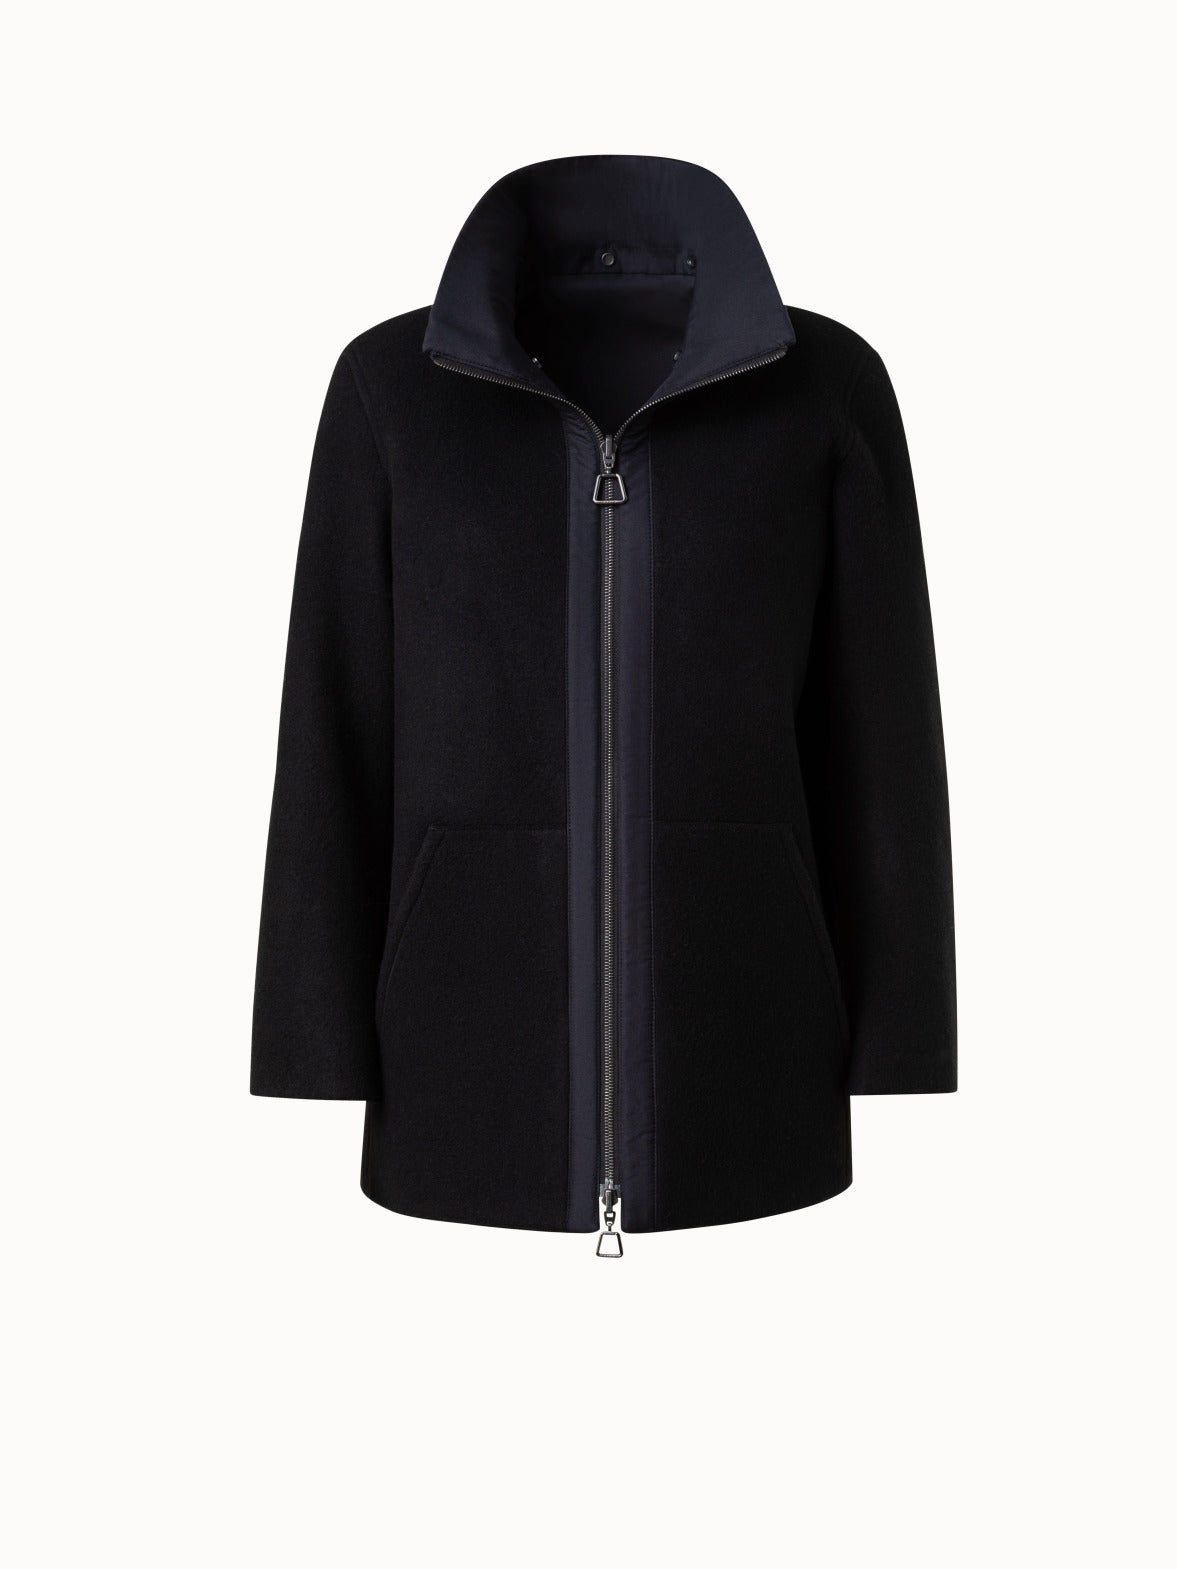 Cashmere Jersey and Silk Poplin Reversible Jacket with Detachable Hood